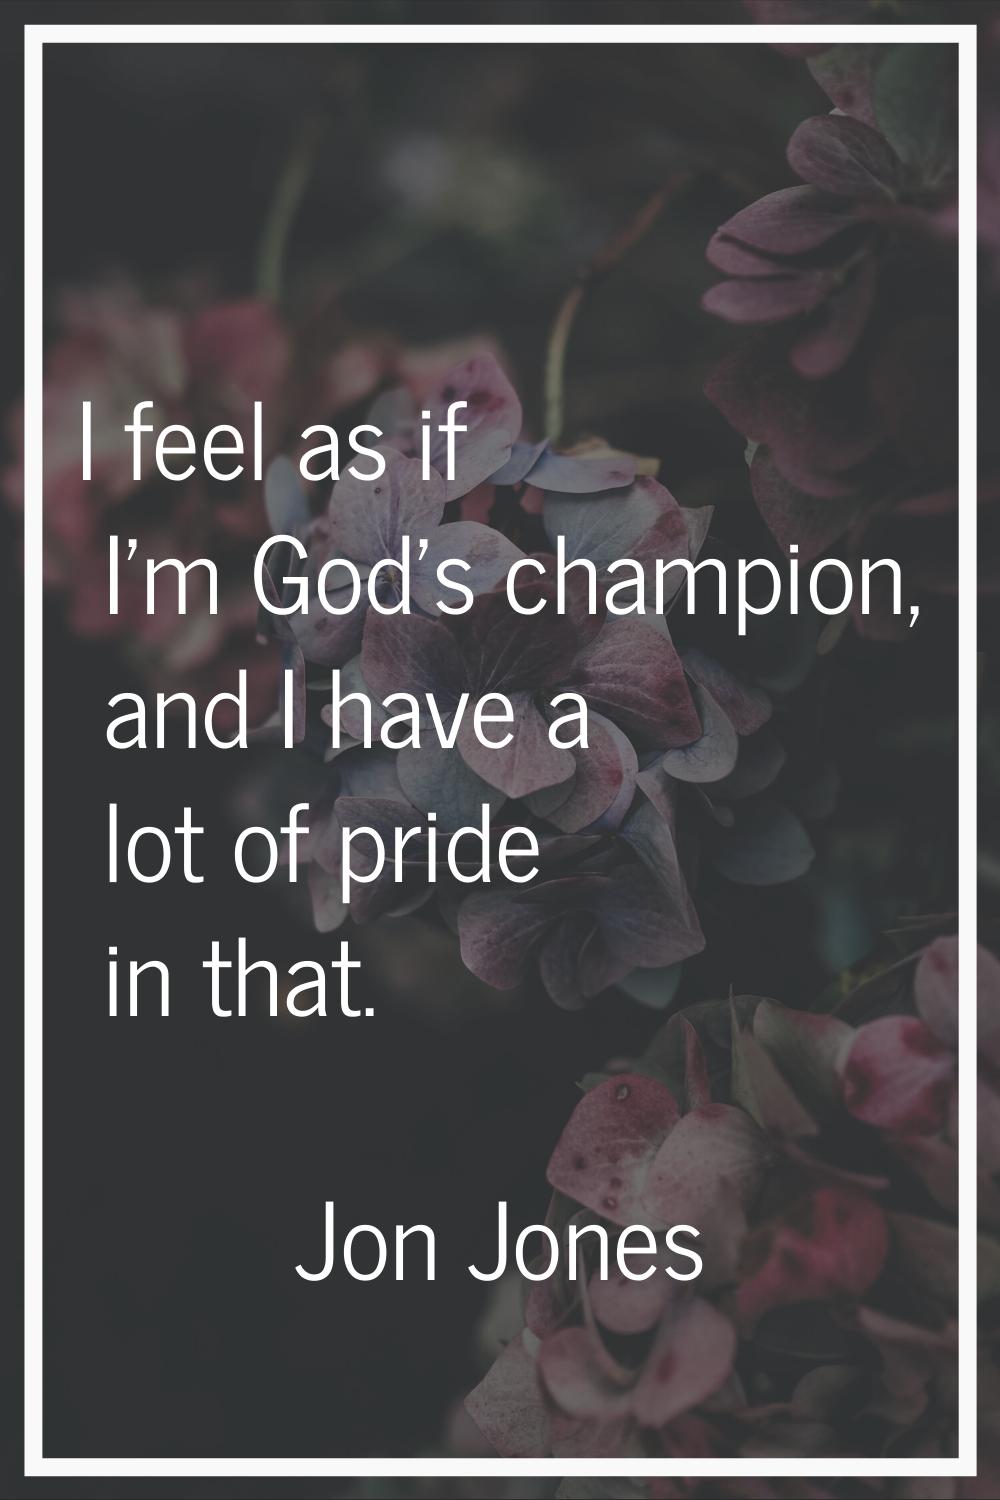 I feel as if I'm God's champion, and I have a lot of pride in that.